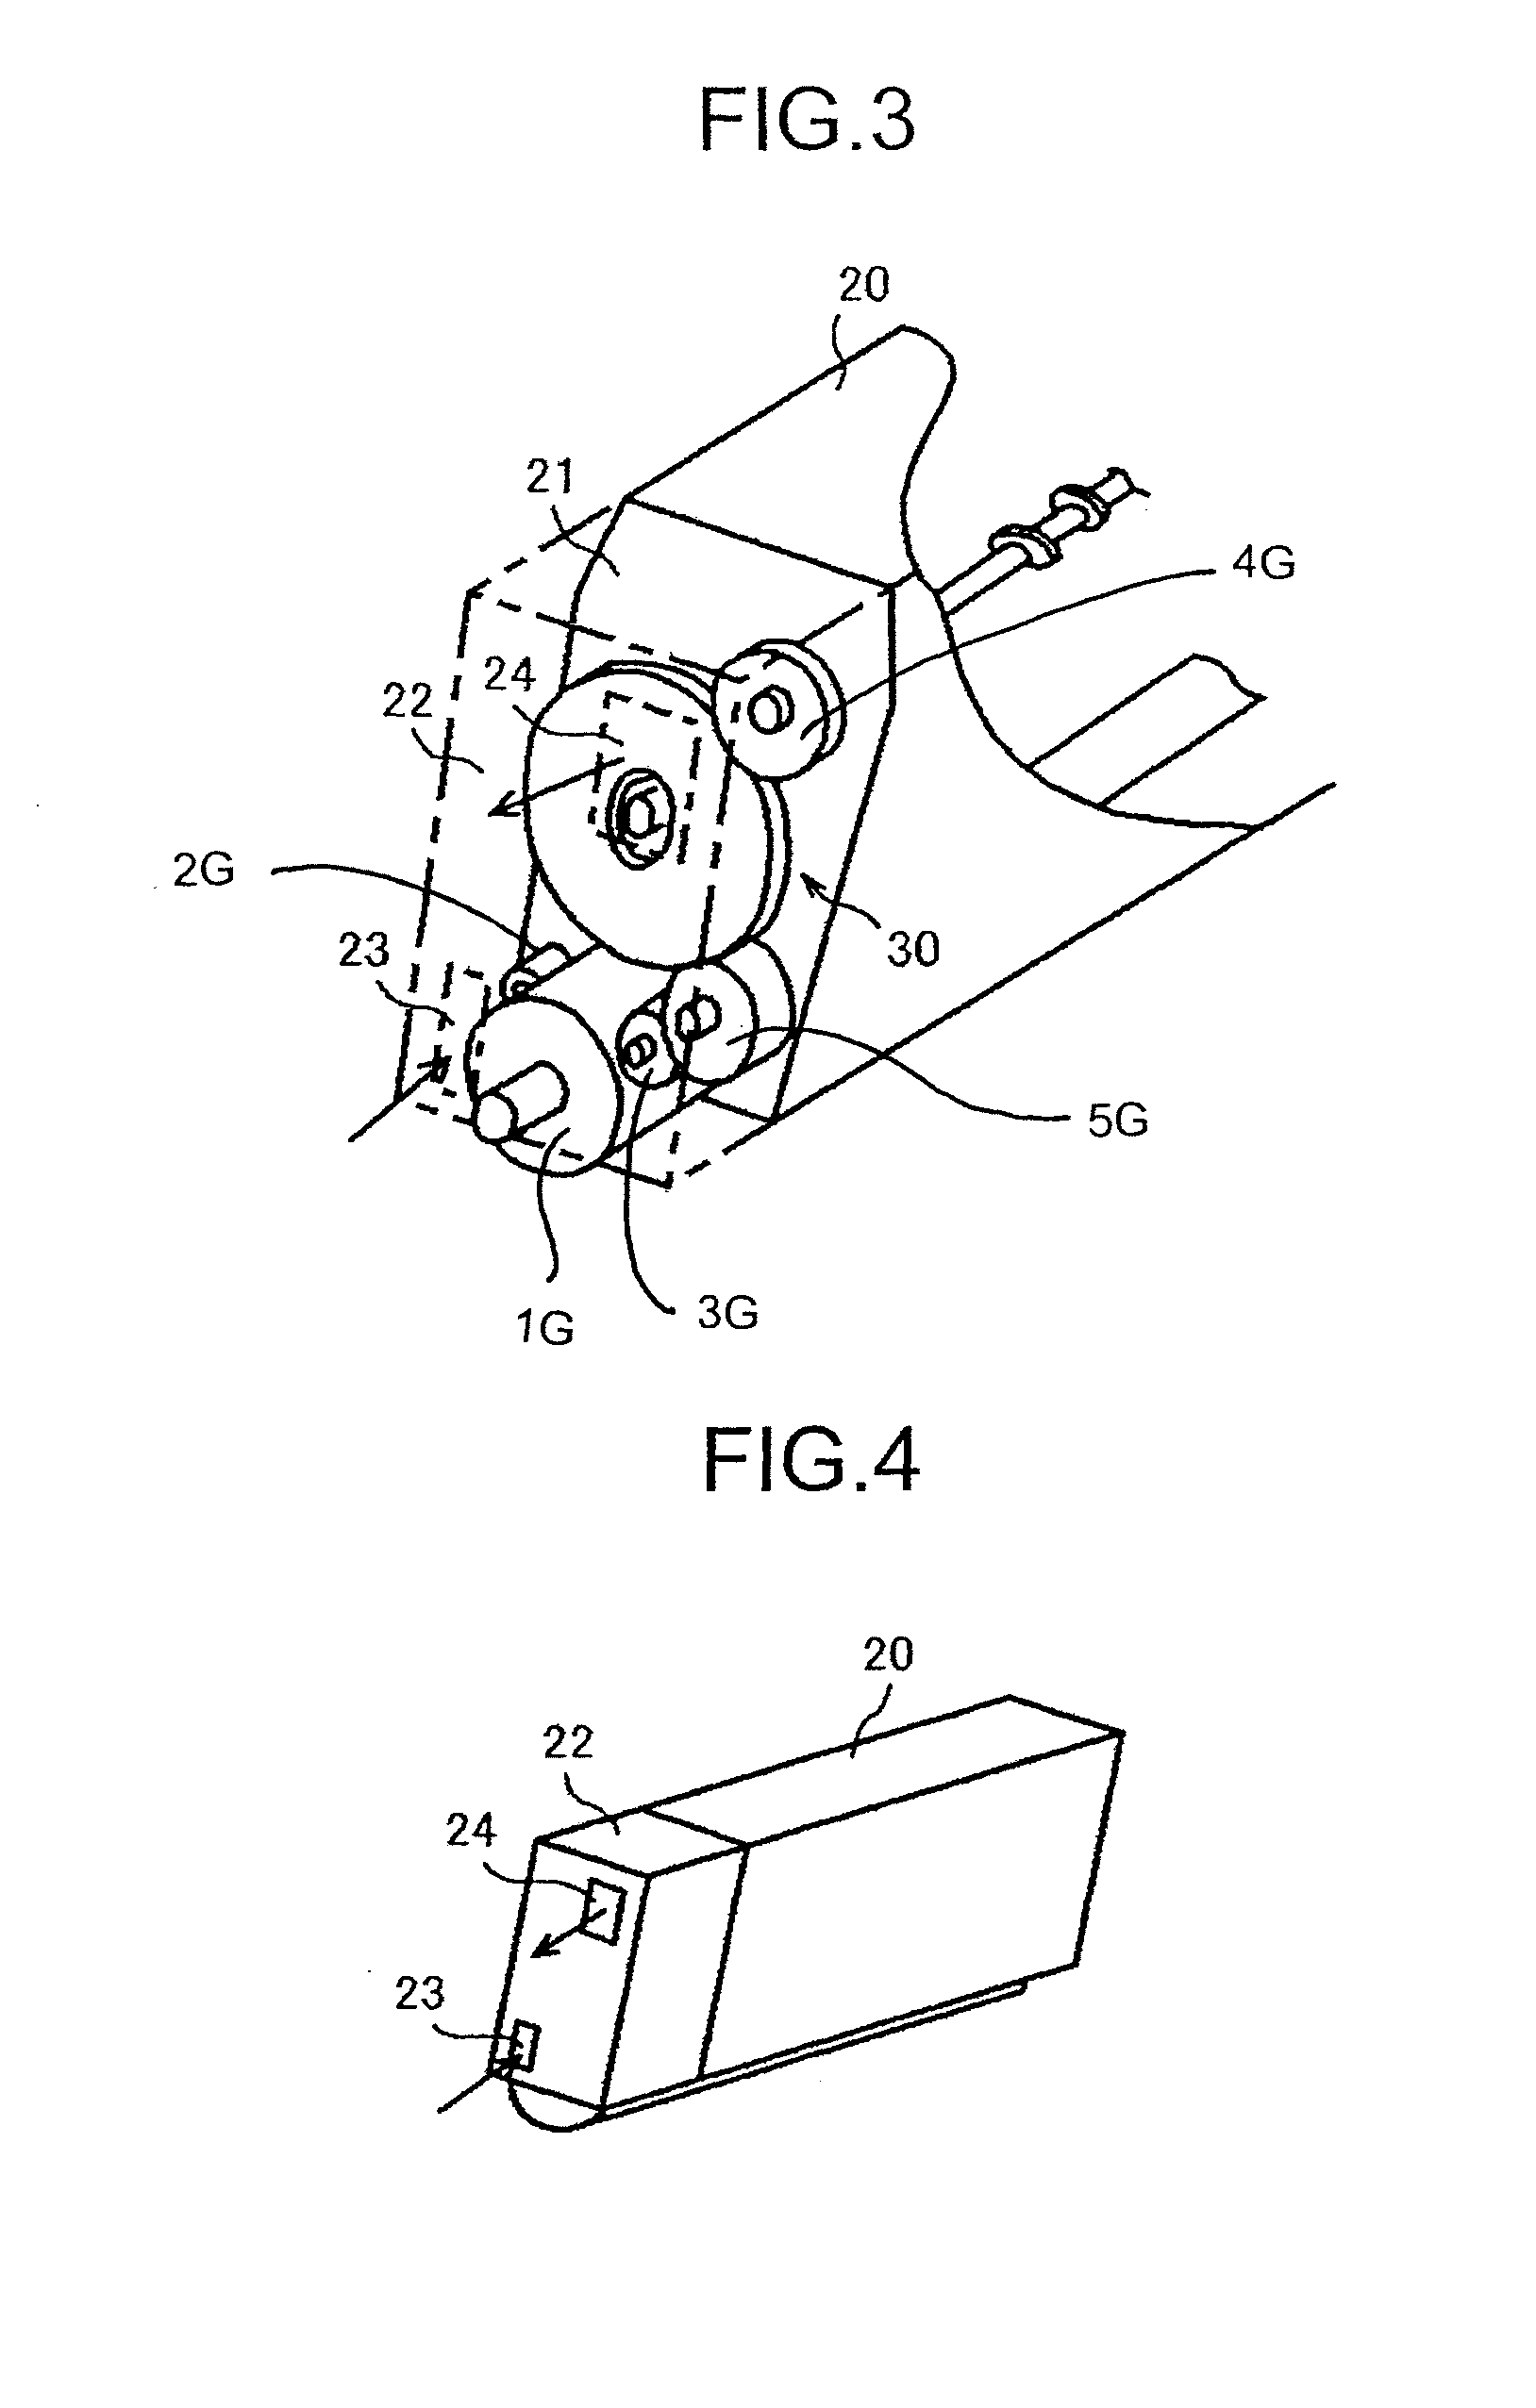 Process cartridge having air inlets and outlets for cooling gears disposed in the process cartridge